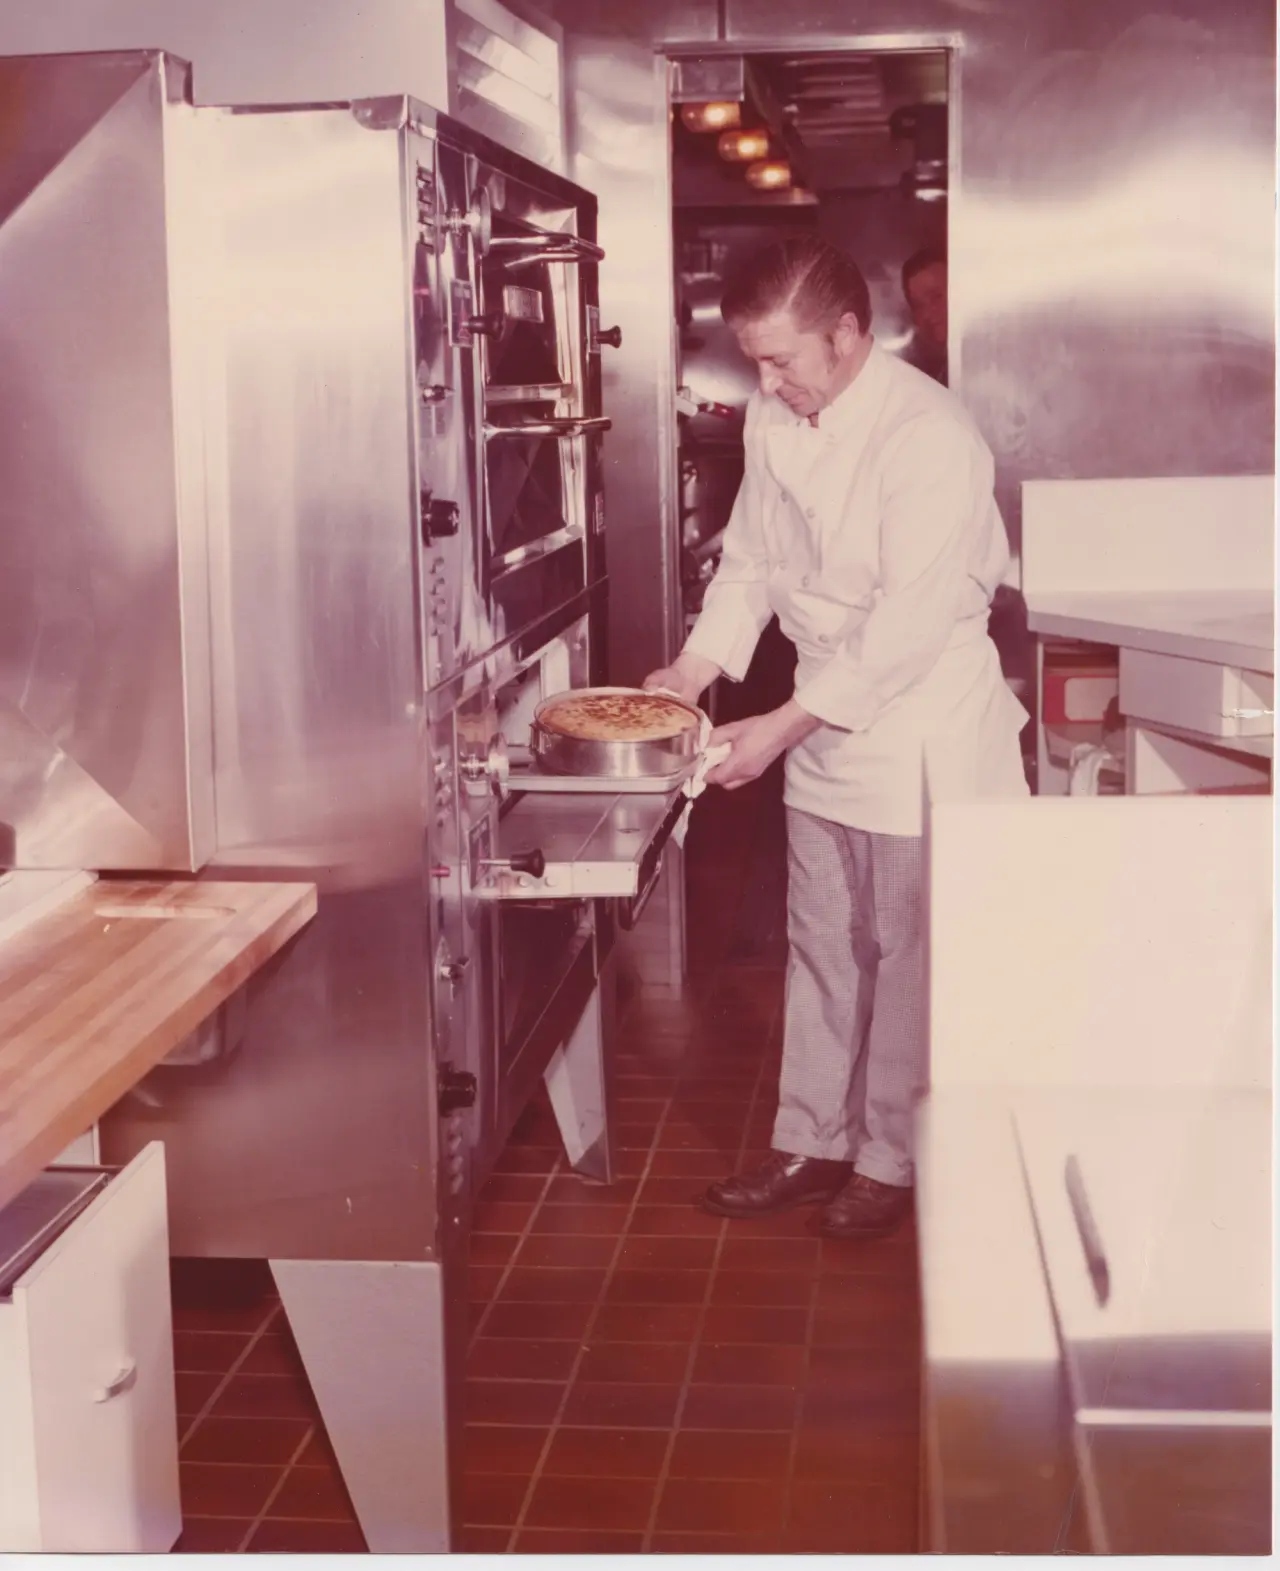 A chef is carefully removing a pie from an industrial oven in a professional kitchen setting.